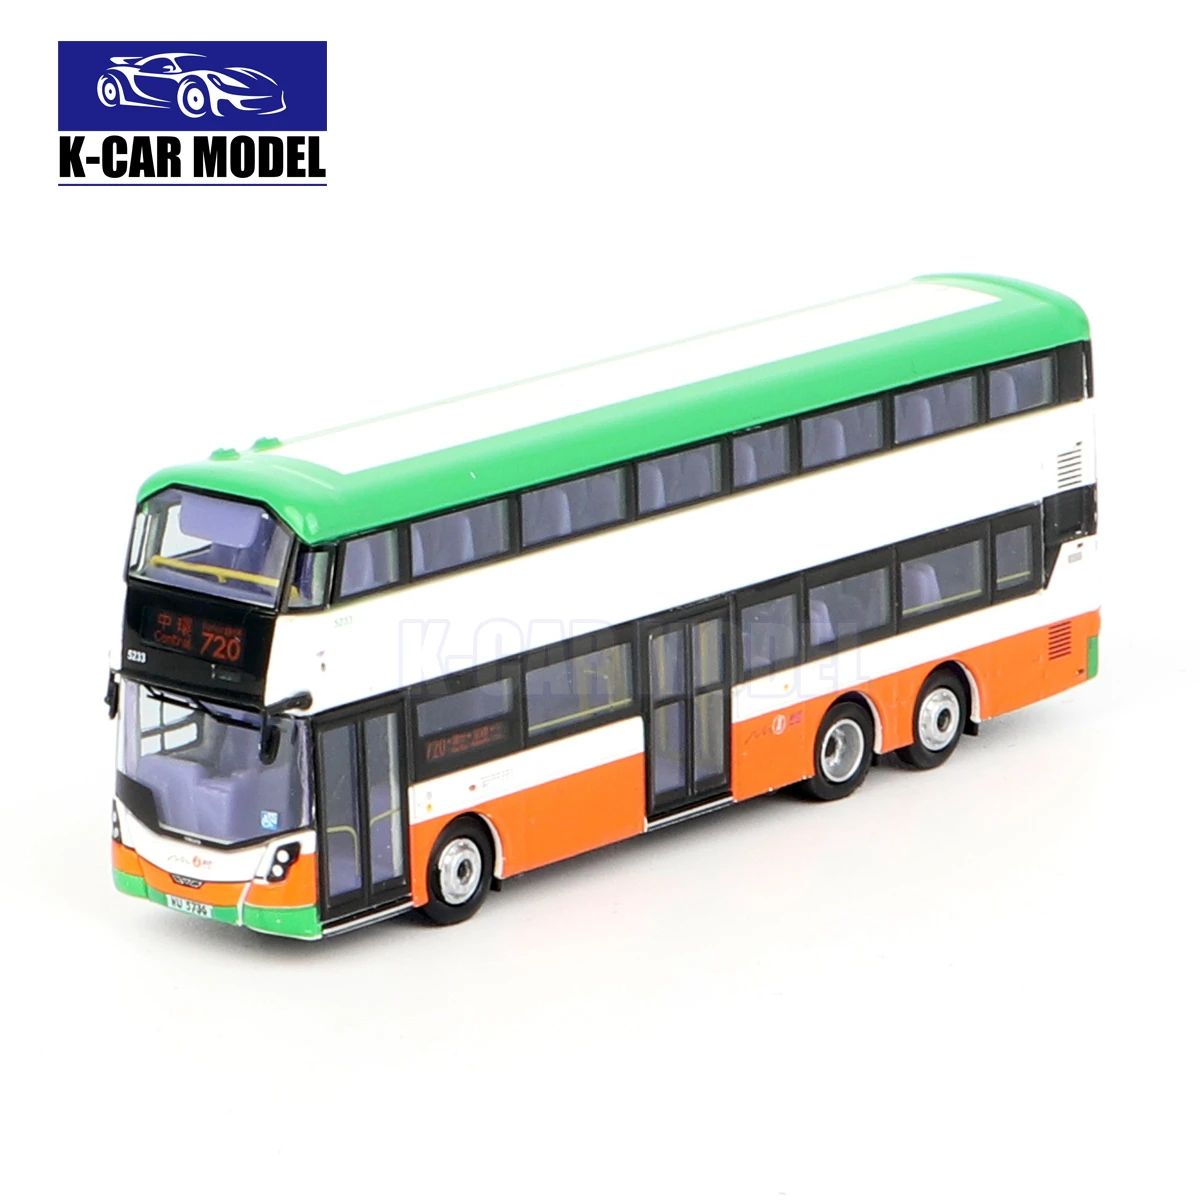 Model1 1/120 Hongkong First Bus B8L Route 720 Double-decker Bus Mini Diecast Model Car Toys Gifts For Father Friend